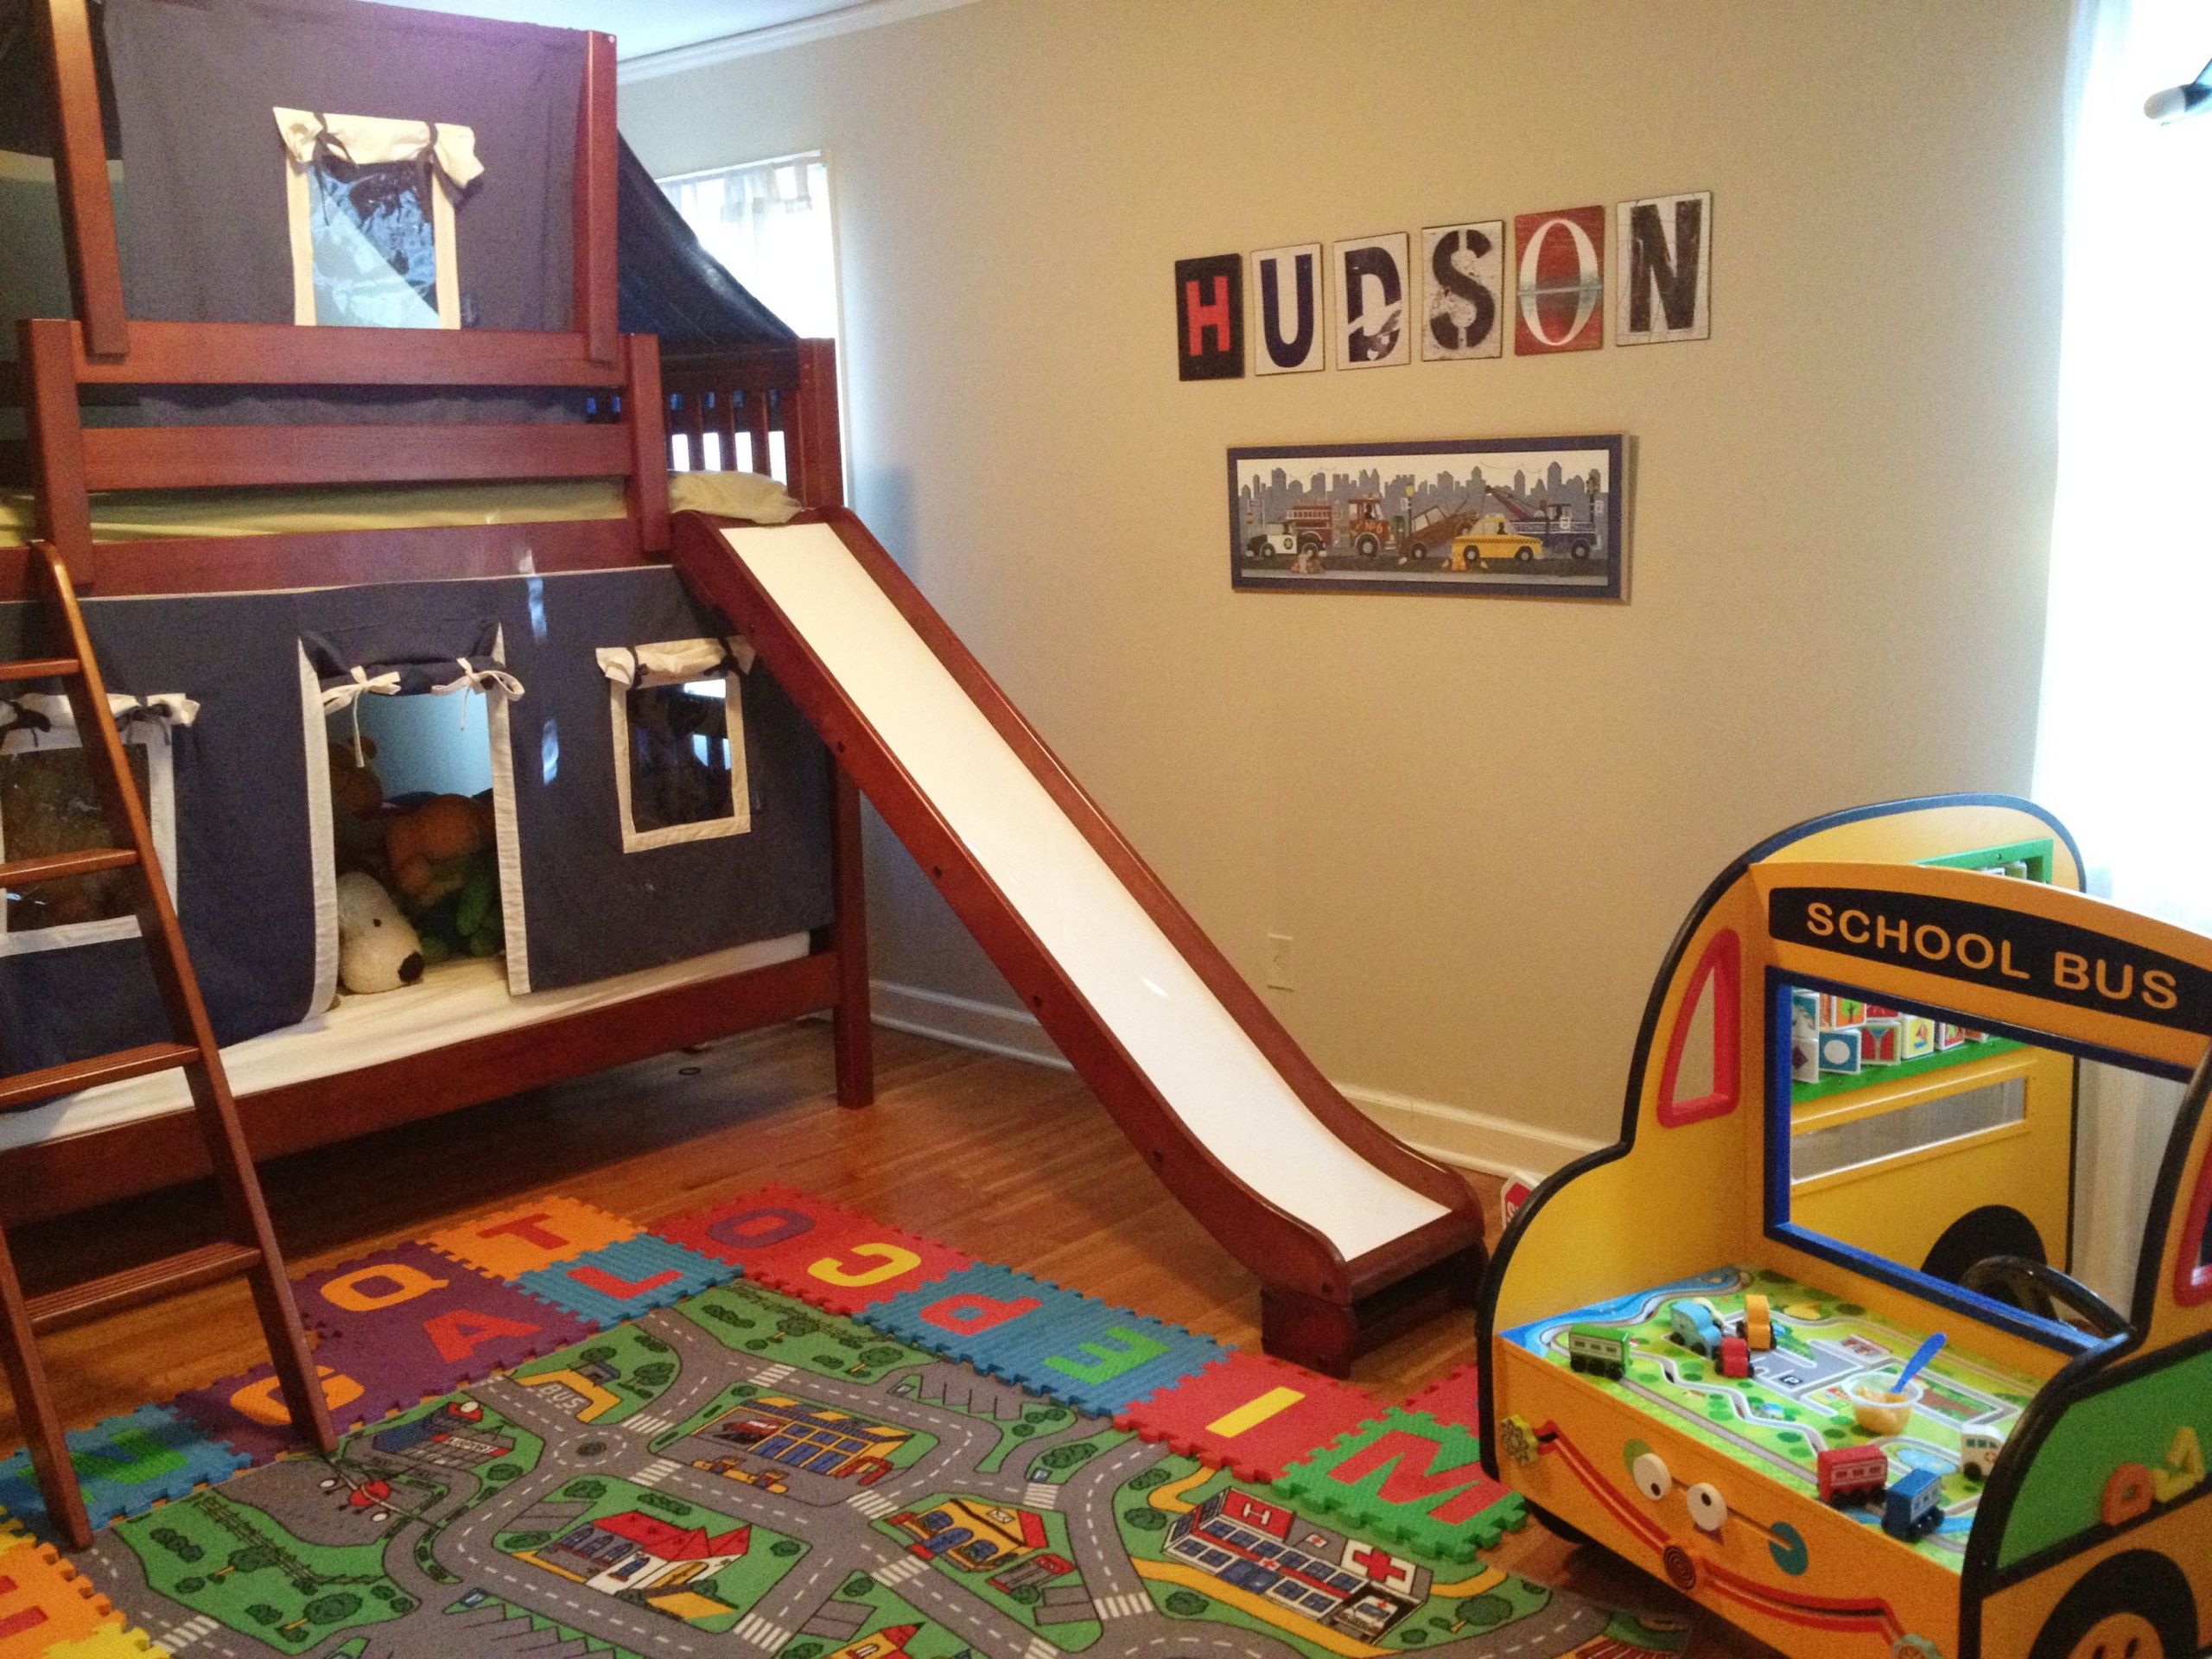 Toddler Boys Bedroom Themes
 The 25 best Toddler boy bedrooms ideas on Pinterest